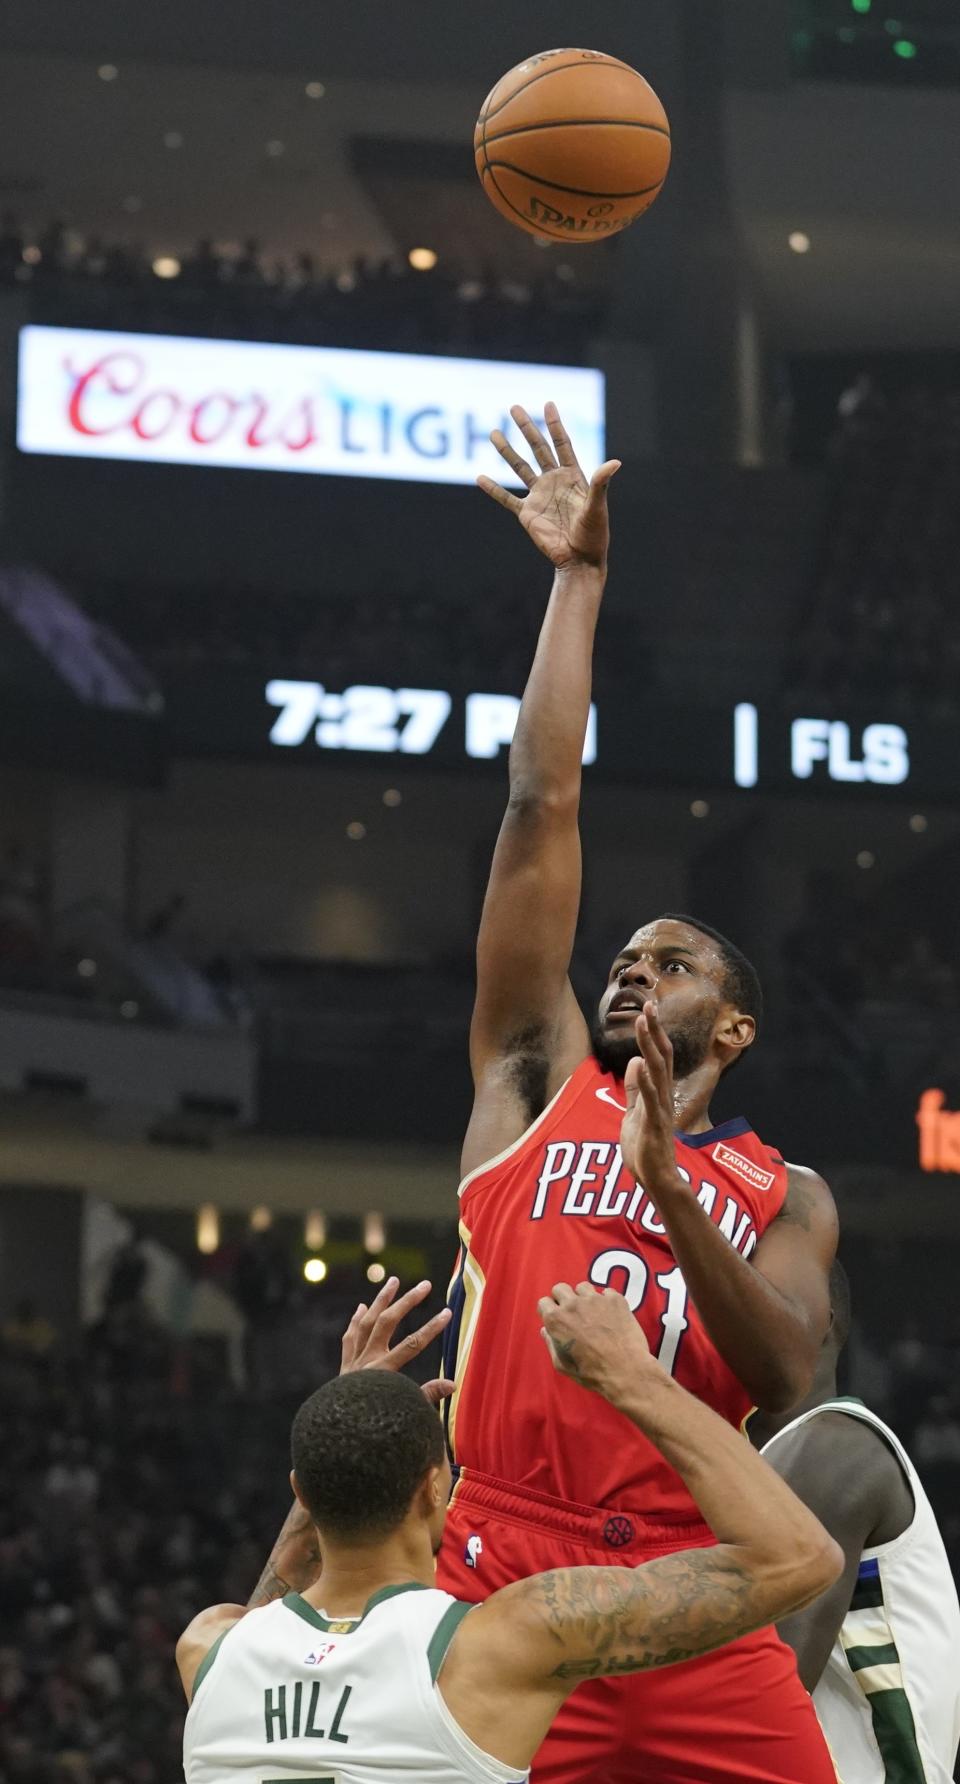 New Orleans Pelicans' Darius Miller shoots during the first half of an NBA basketball game against the Milwaukee Bucks Wednesday, Dec. 19, 2018, in Milwaukee. (AP Photo/Morry Gash)